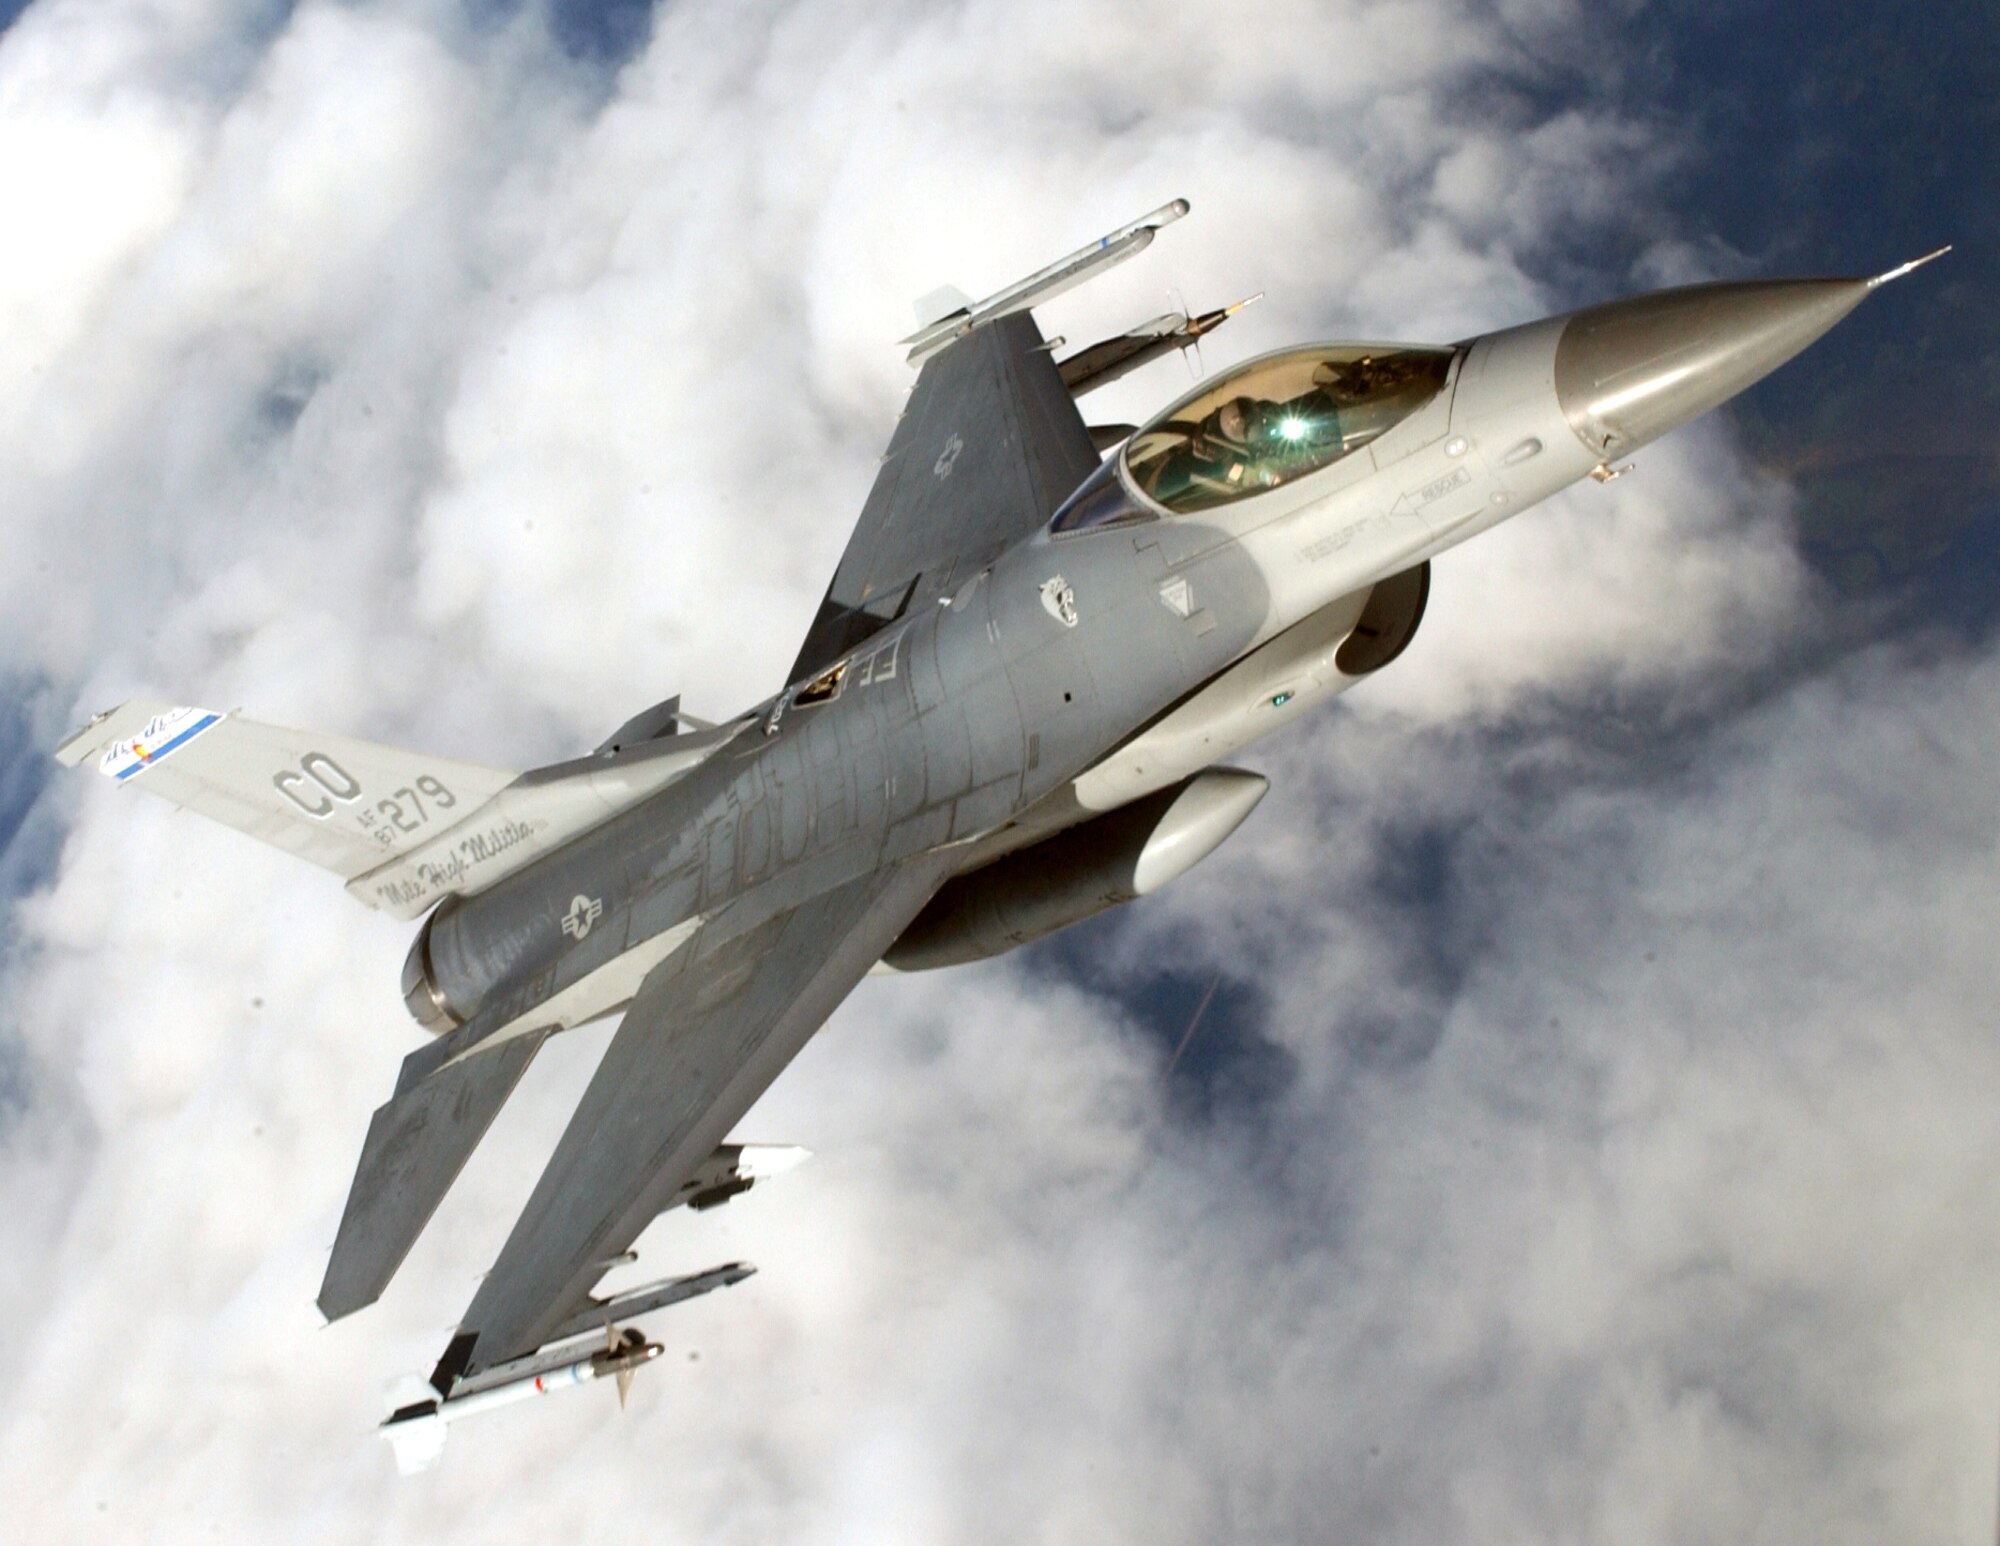 F-16 Fighting Falcon from the 140th Wing, Colorado Air National Guard (Colorado Air National Guard photo by Senior Master Sgt. John P. Rohrer)